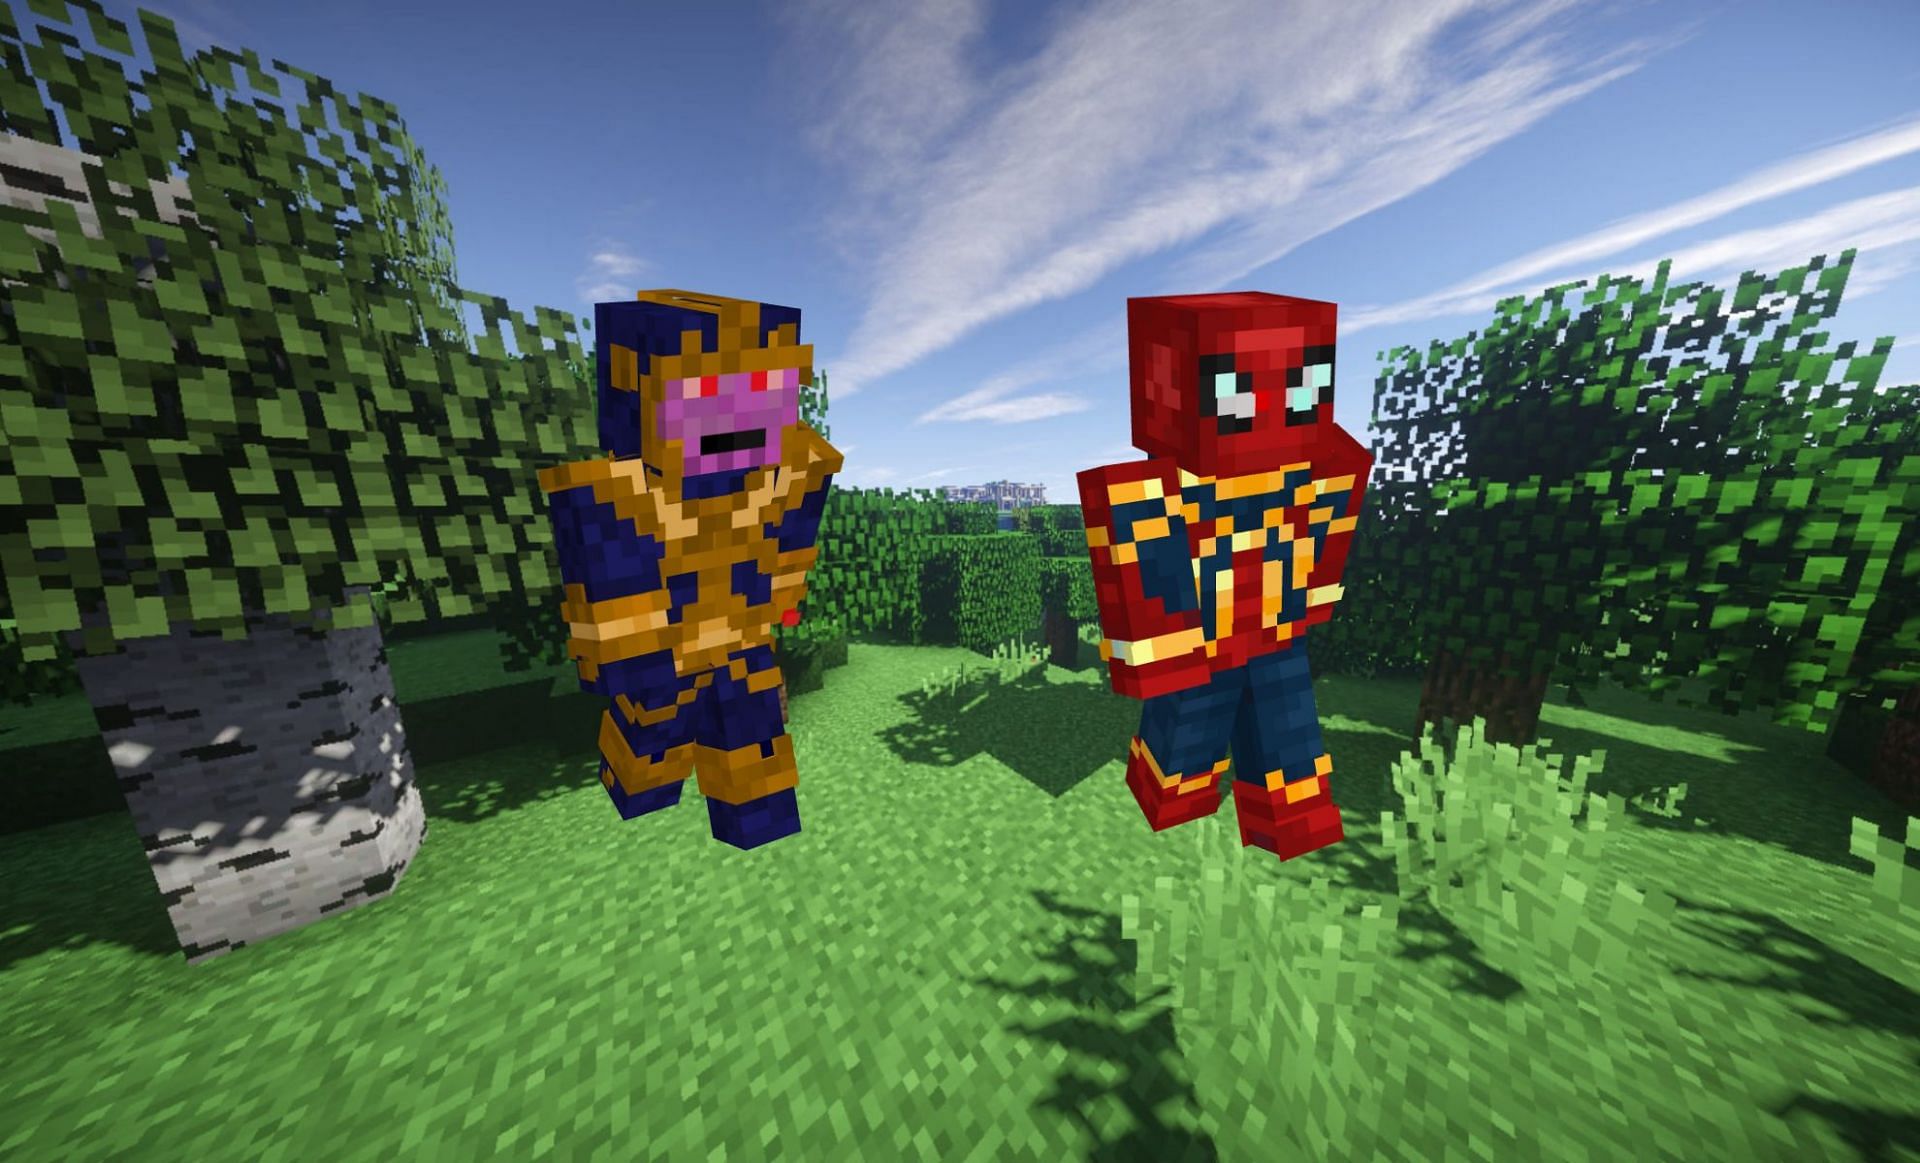 Custom skins can be anything (Image via Minecraft Skins)